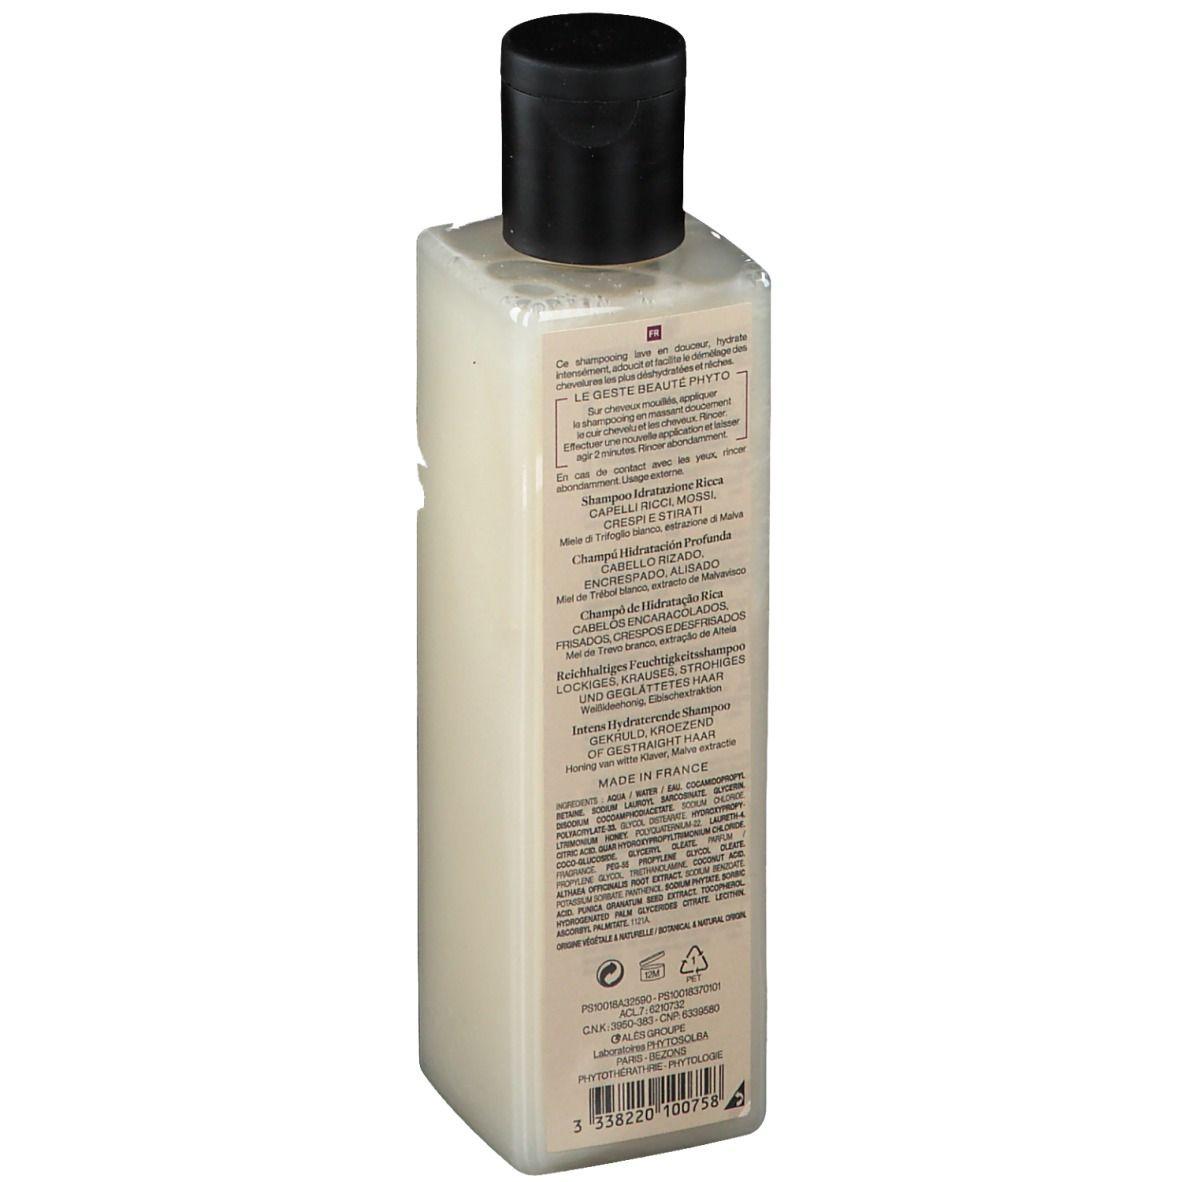 Phyto Phyto Specific Shampooing Hydratation Riche